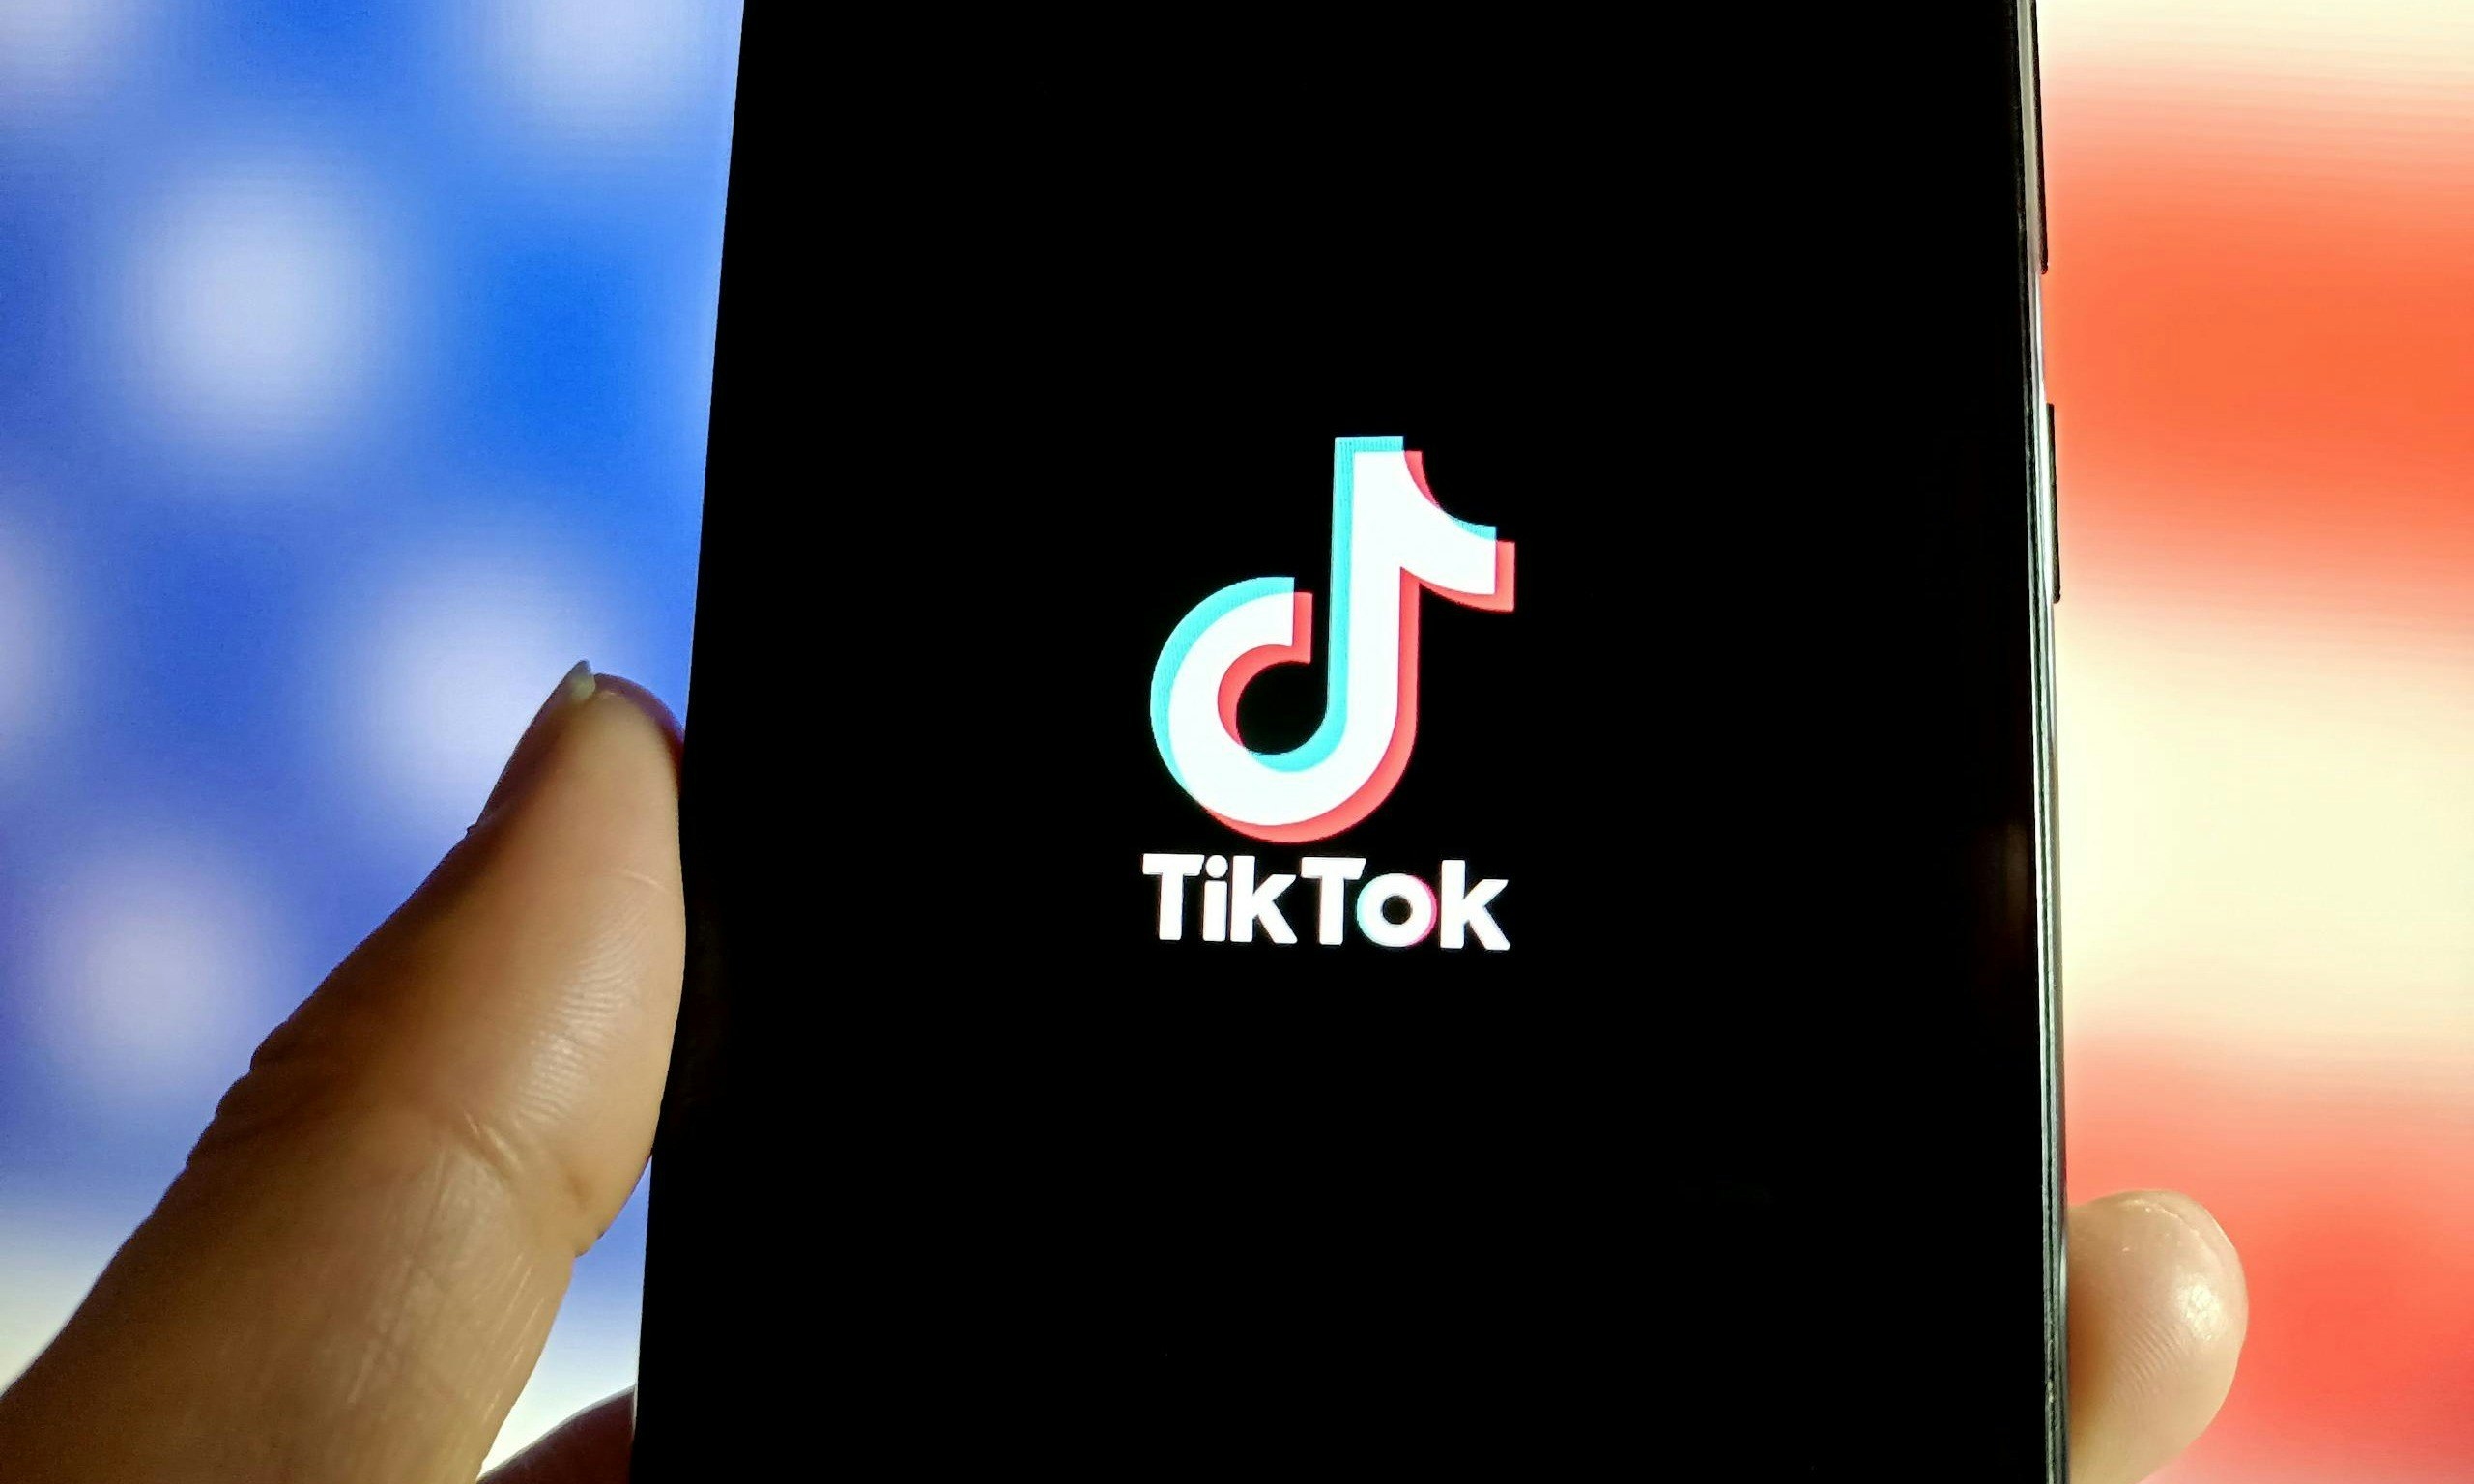 US House Expected to Pass Bill Forcing Chinese Company to Give Up TikTok - The News Lens International Edition